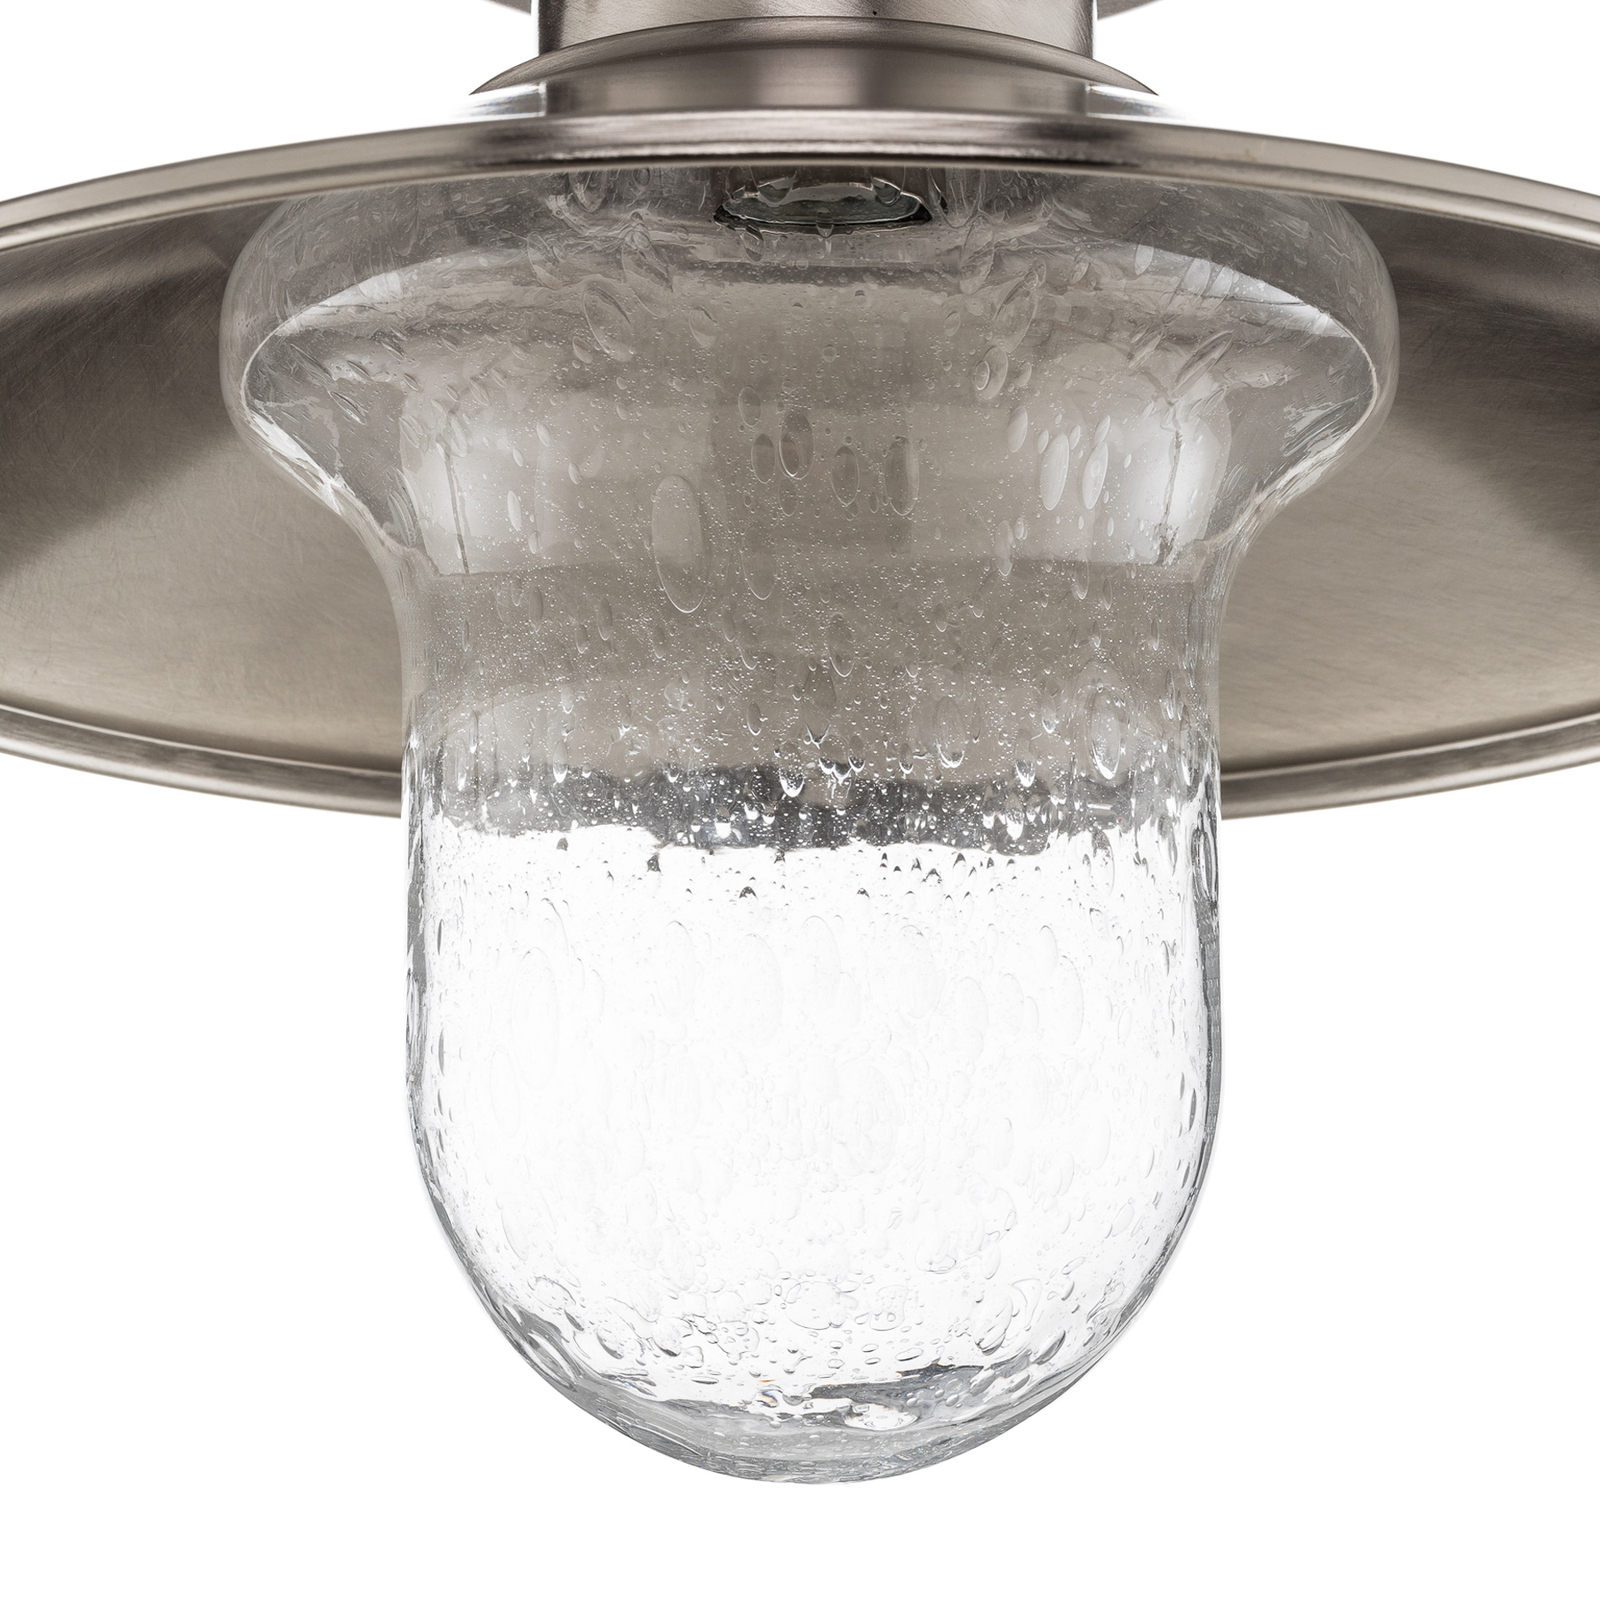 Maestrale ceiling light, clear glass lampshades